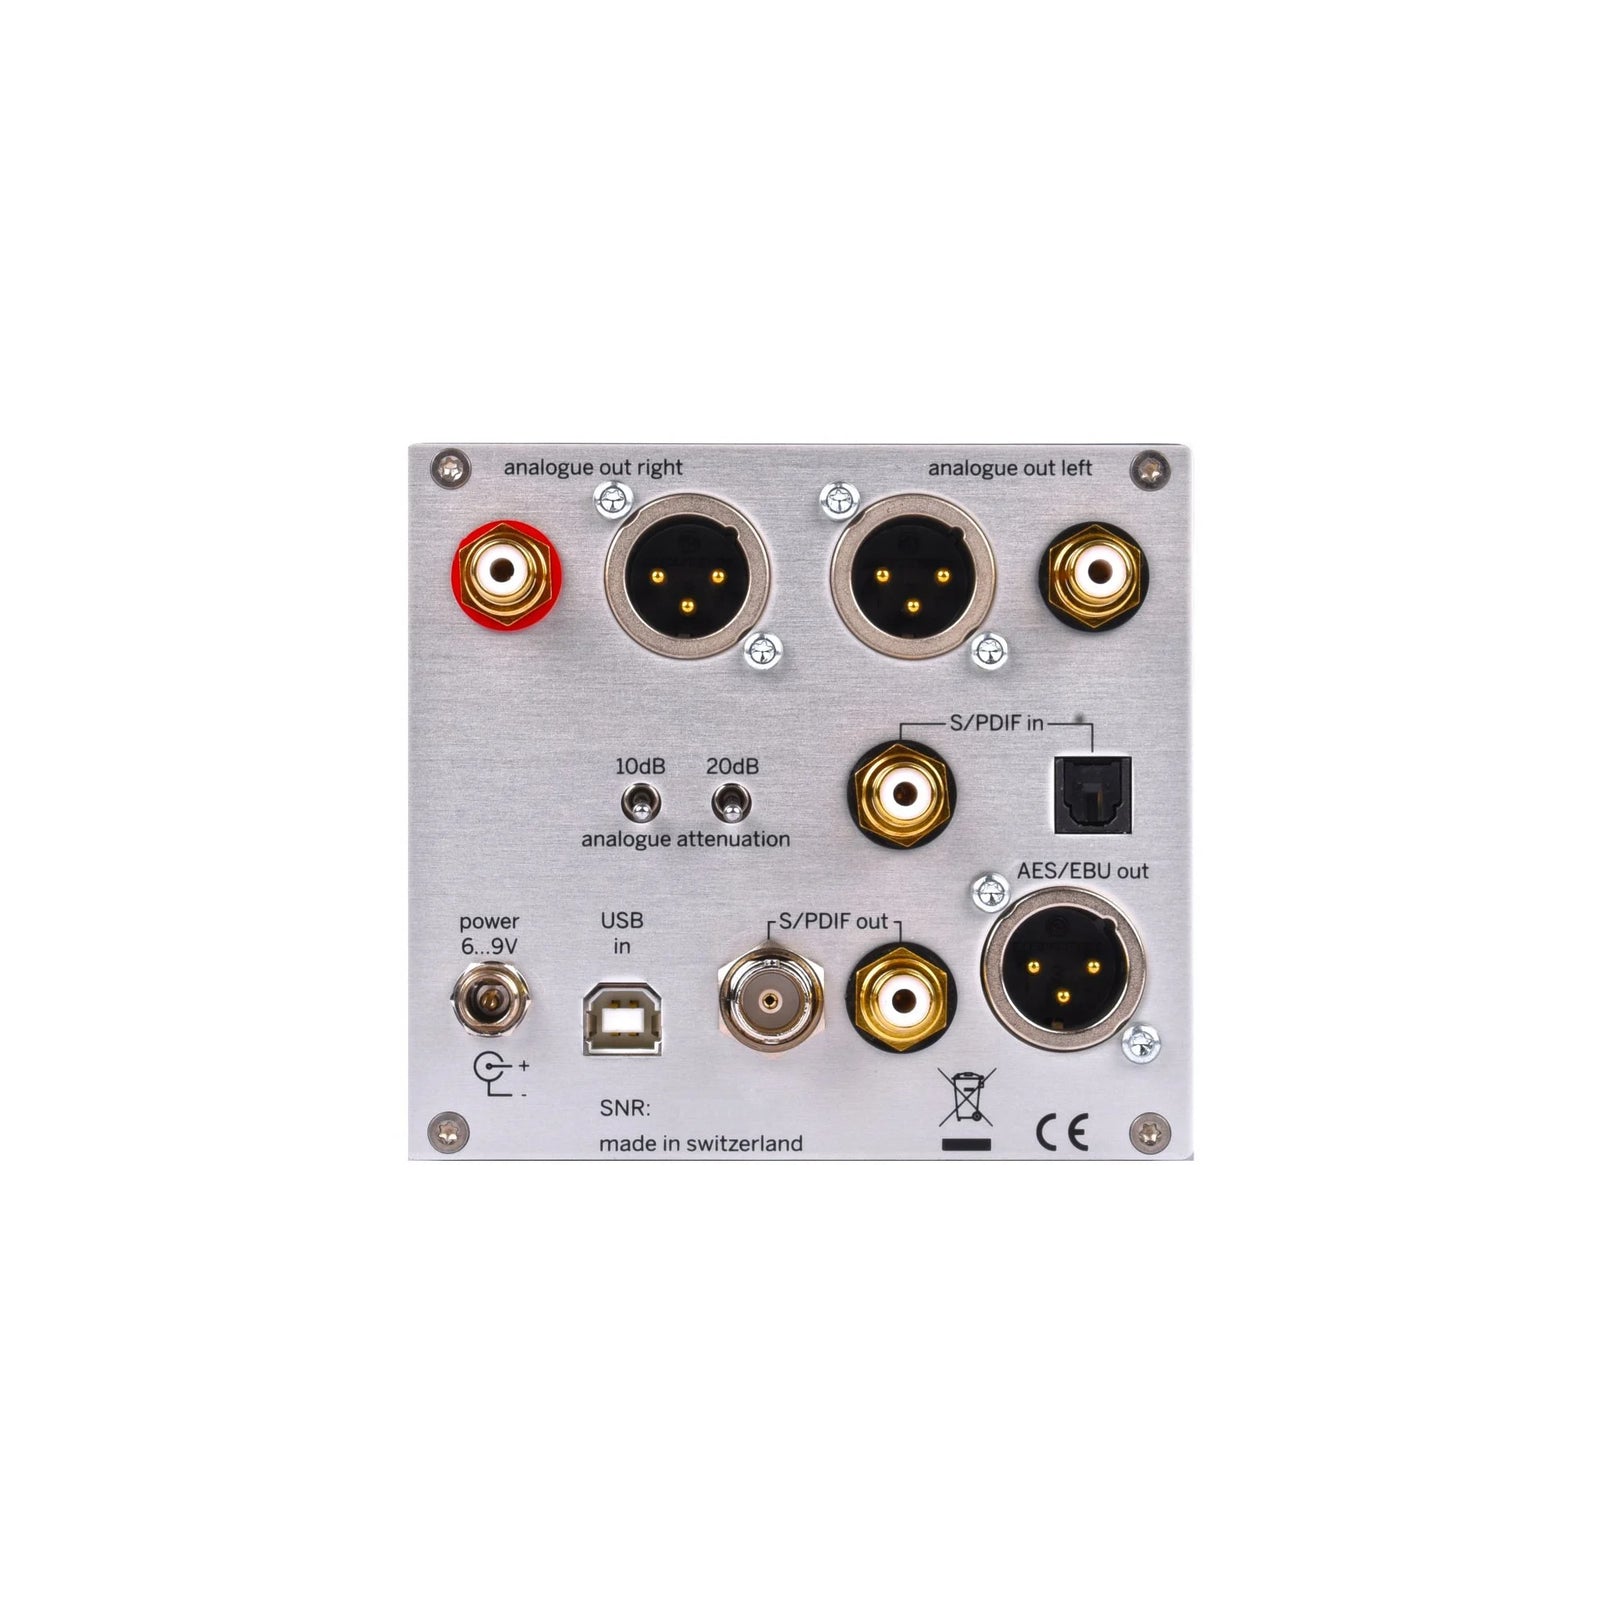 USB, S/PDIF D/A Converter 24 Bit/384kHz/DSD and D/D Converter Dare we call the DAC204 a Swiss army knife It is certainly the most versatile digital-to-analogue converter in Weiss Engineering